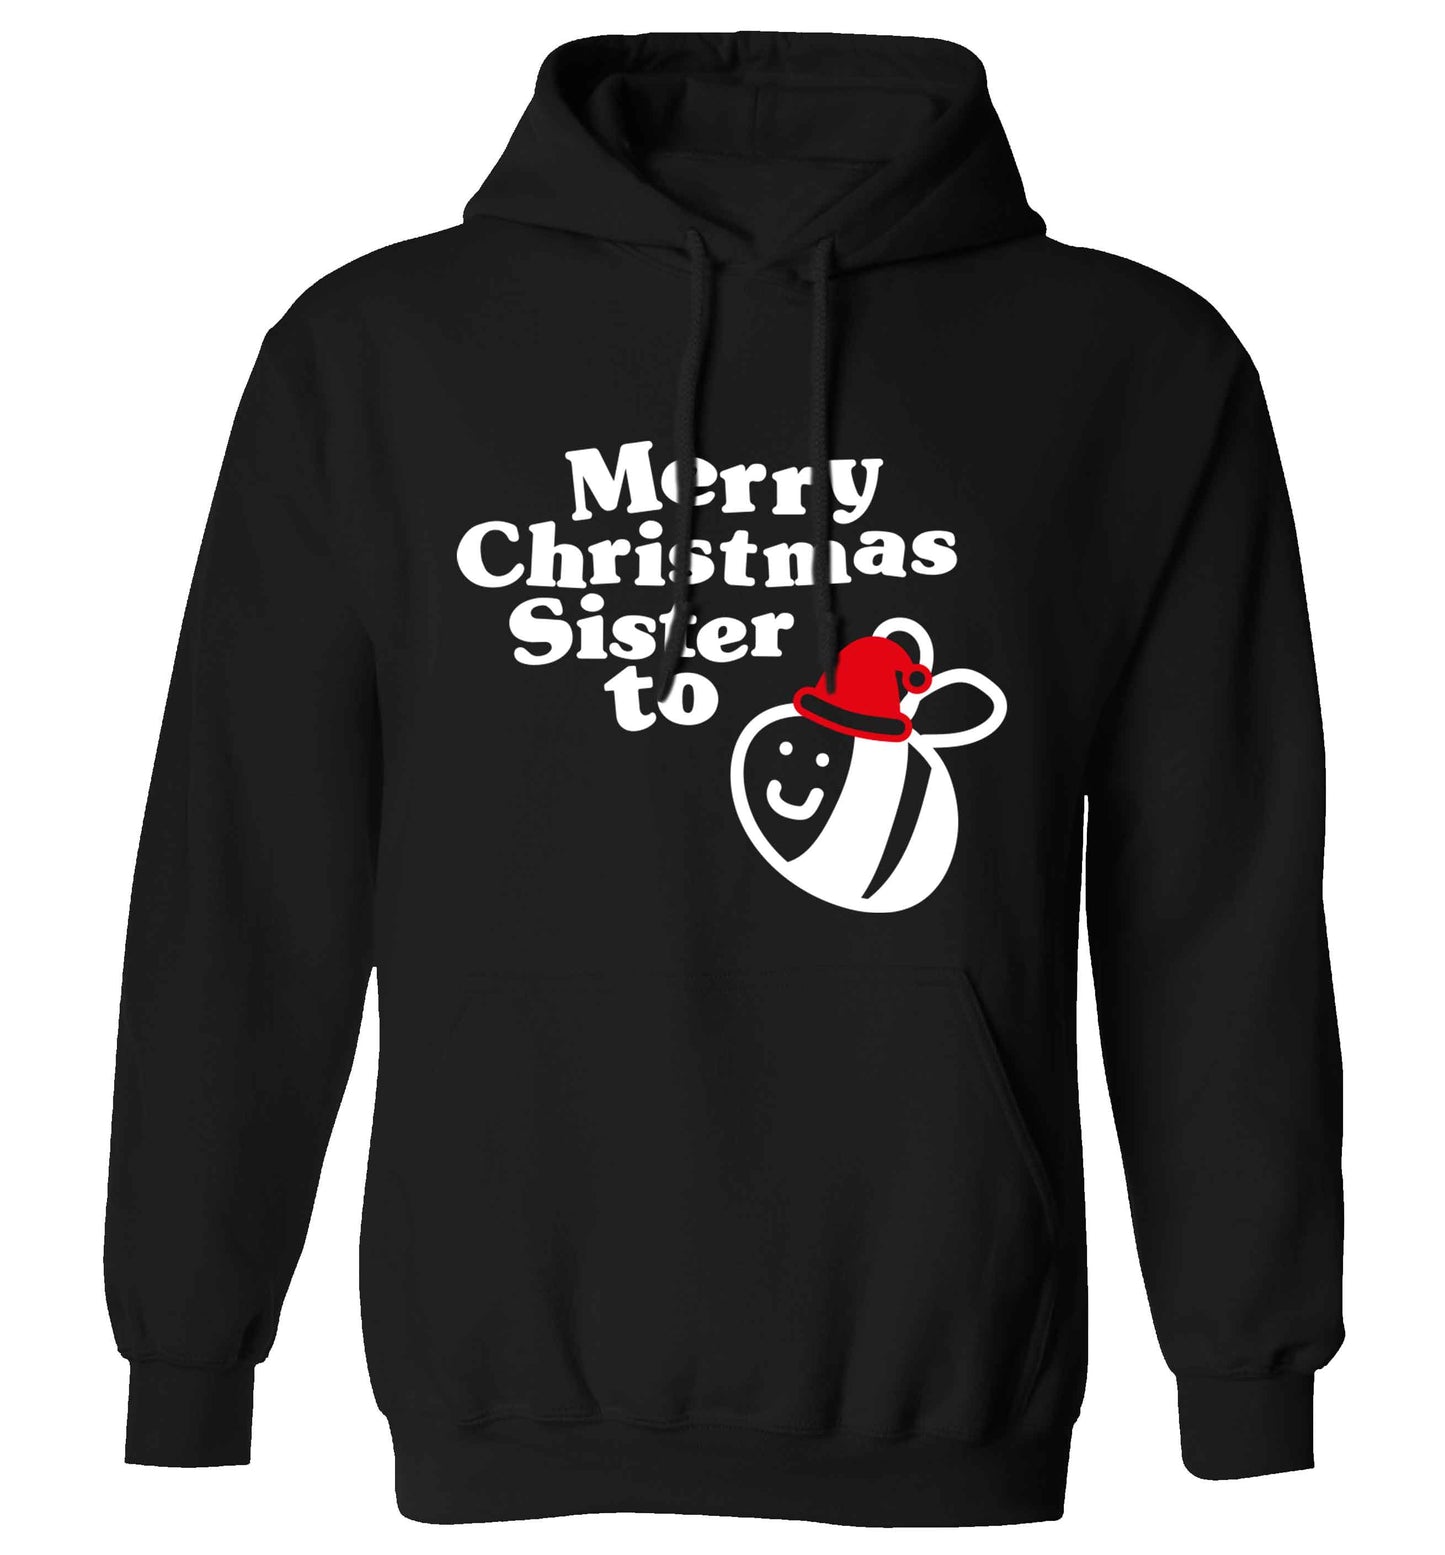 Merry Christmas sister to be adults unisex black hoodie 2XL